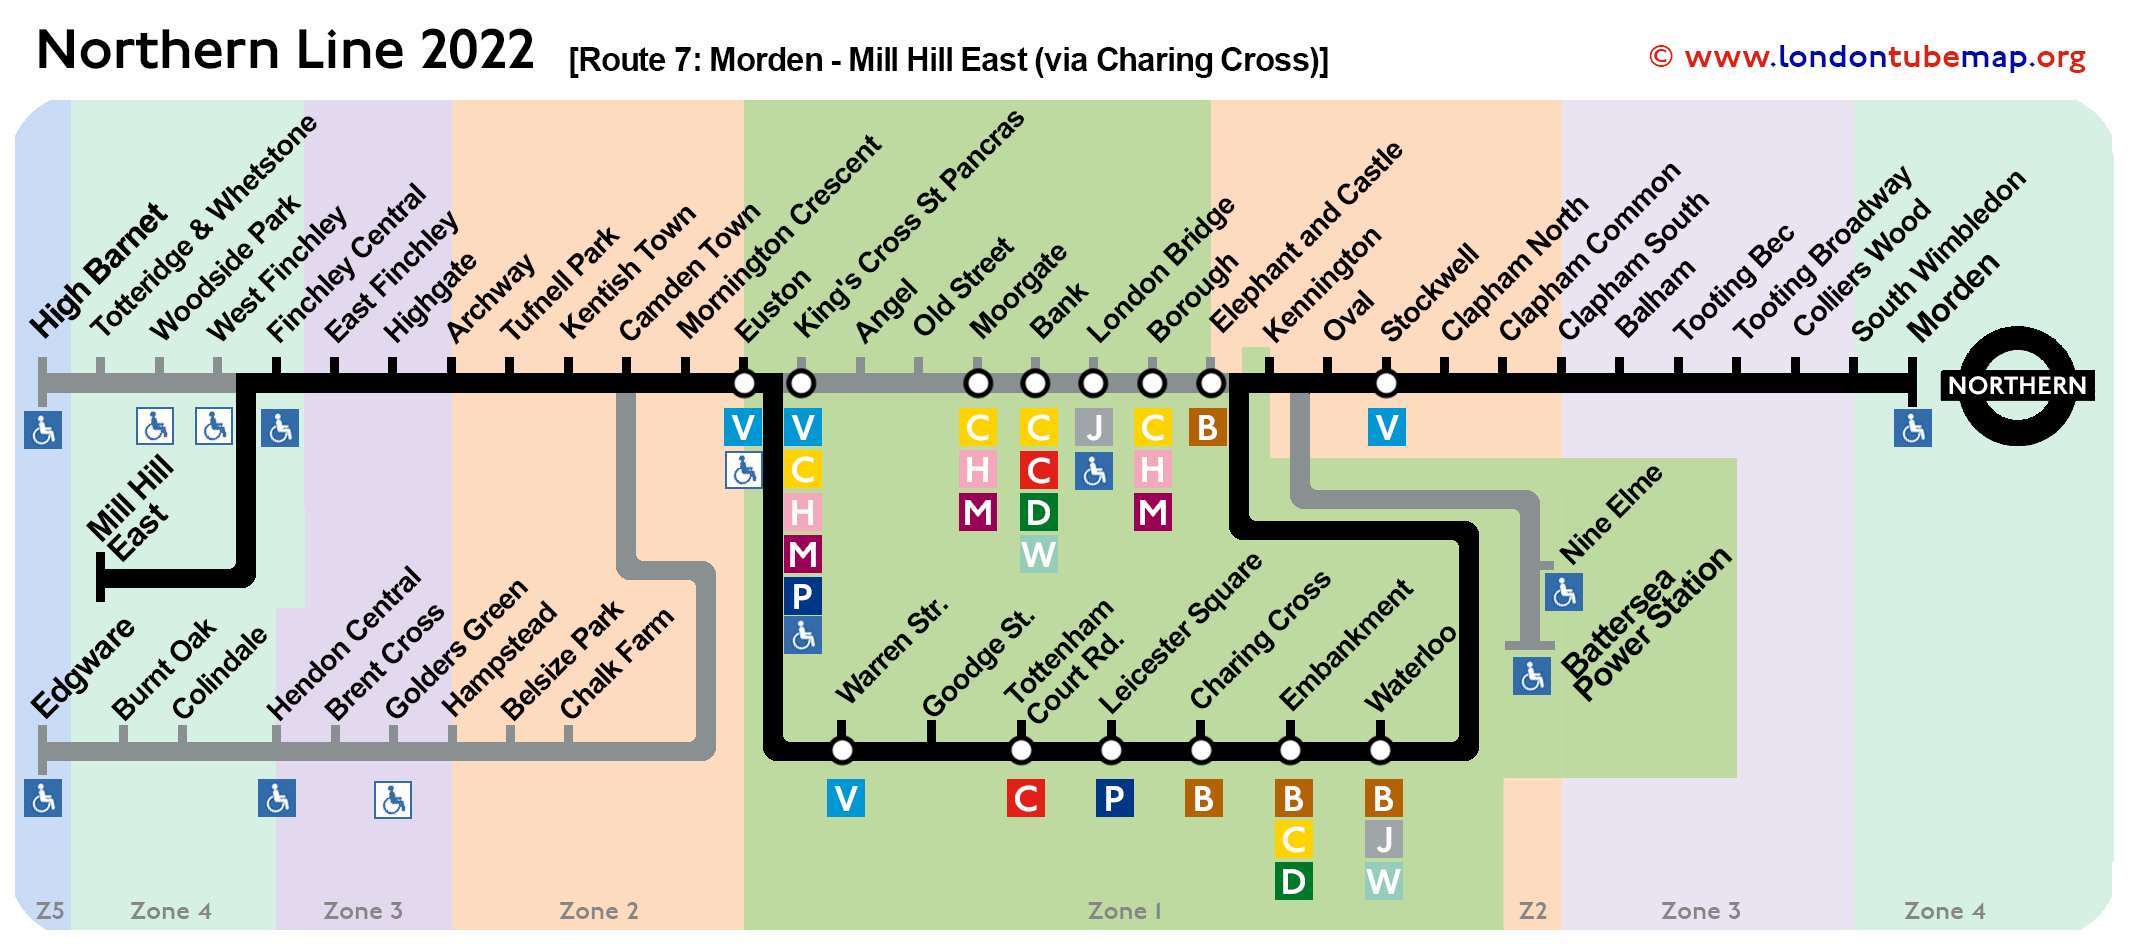 Northern line map 2022 Route-7 Morden Mill Hill East via Charing Cross